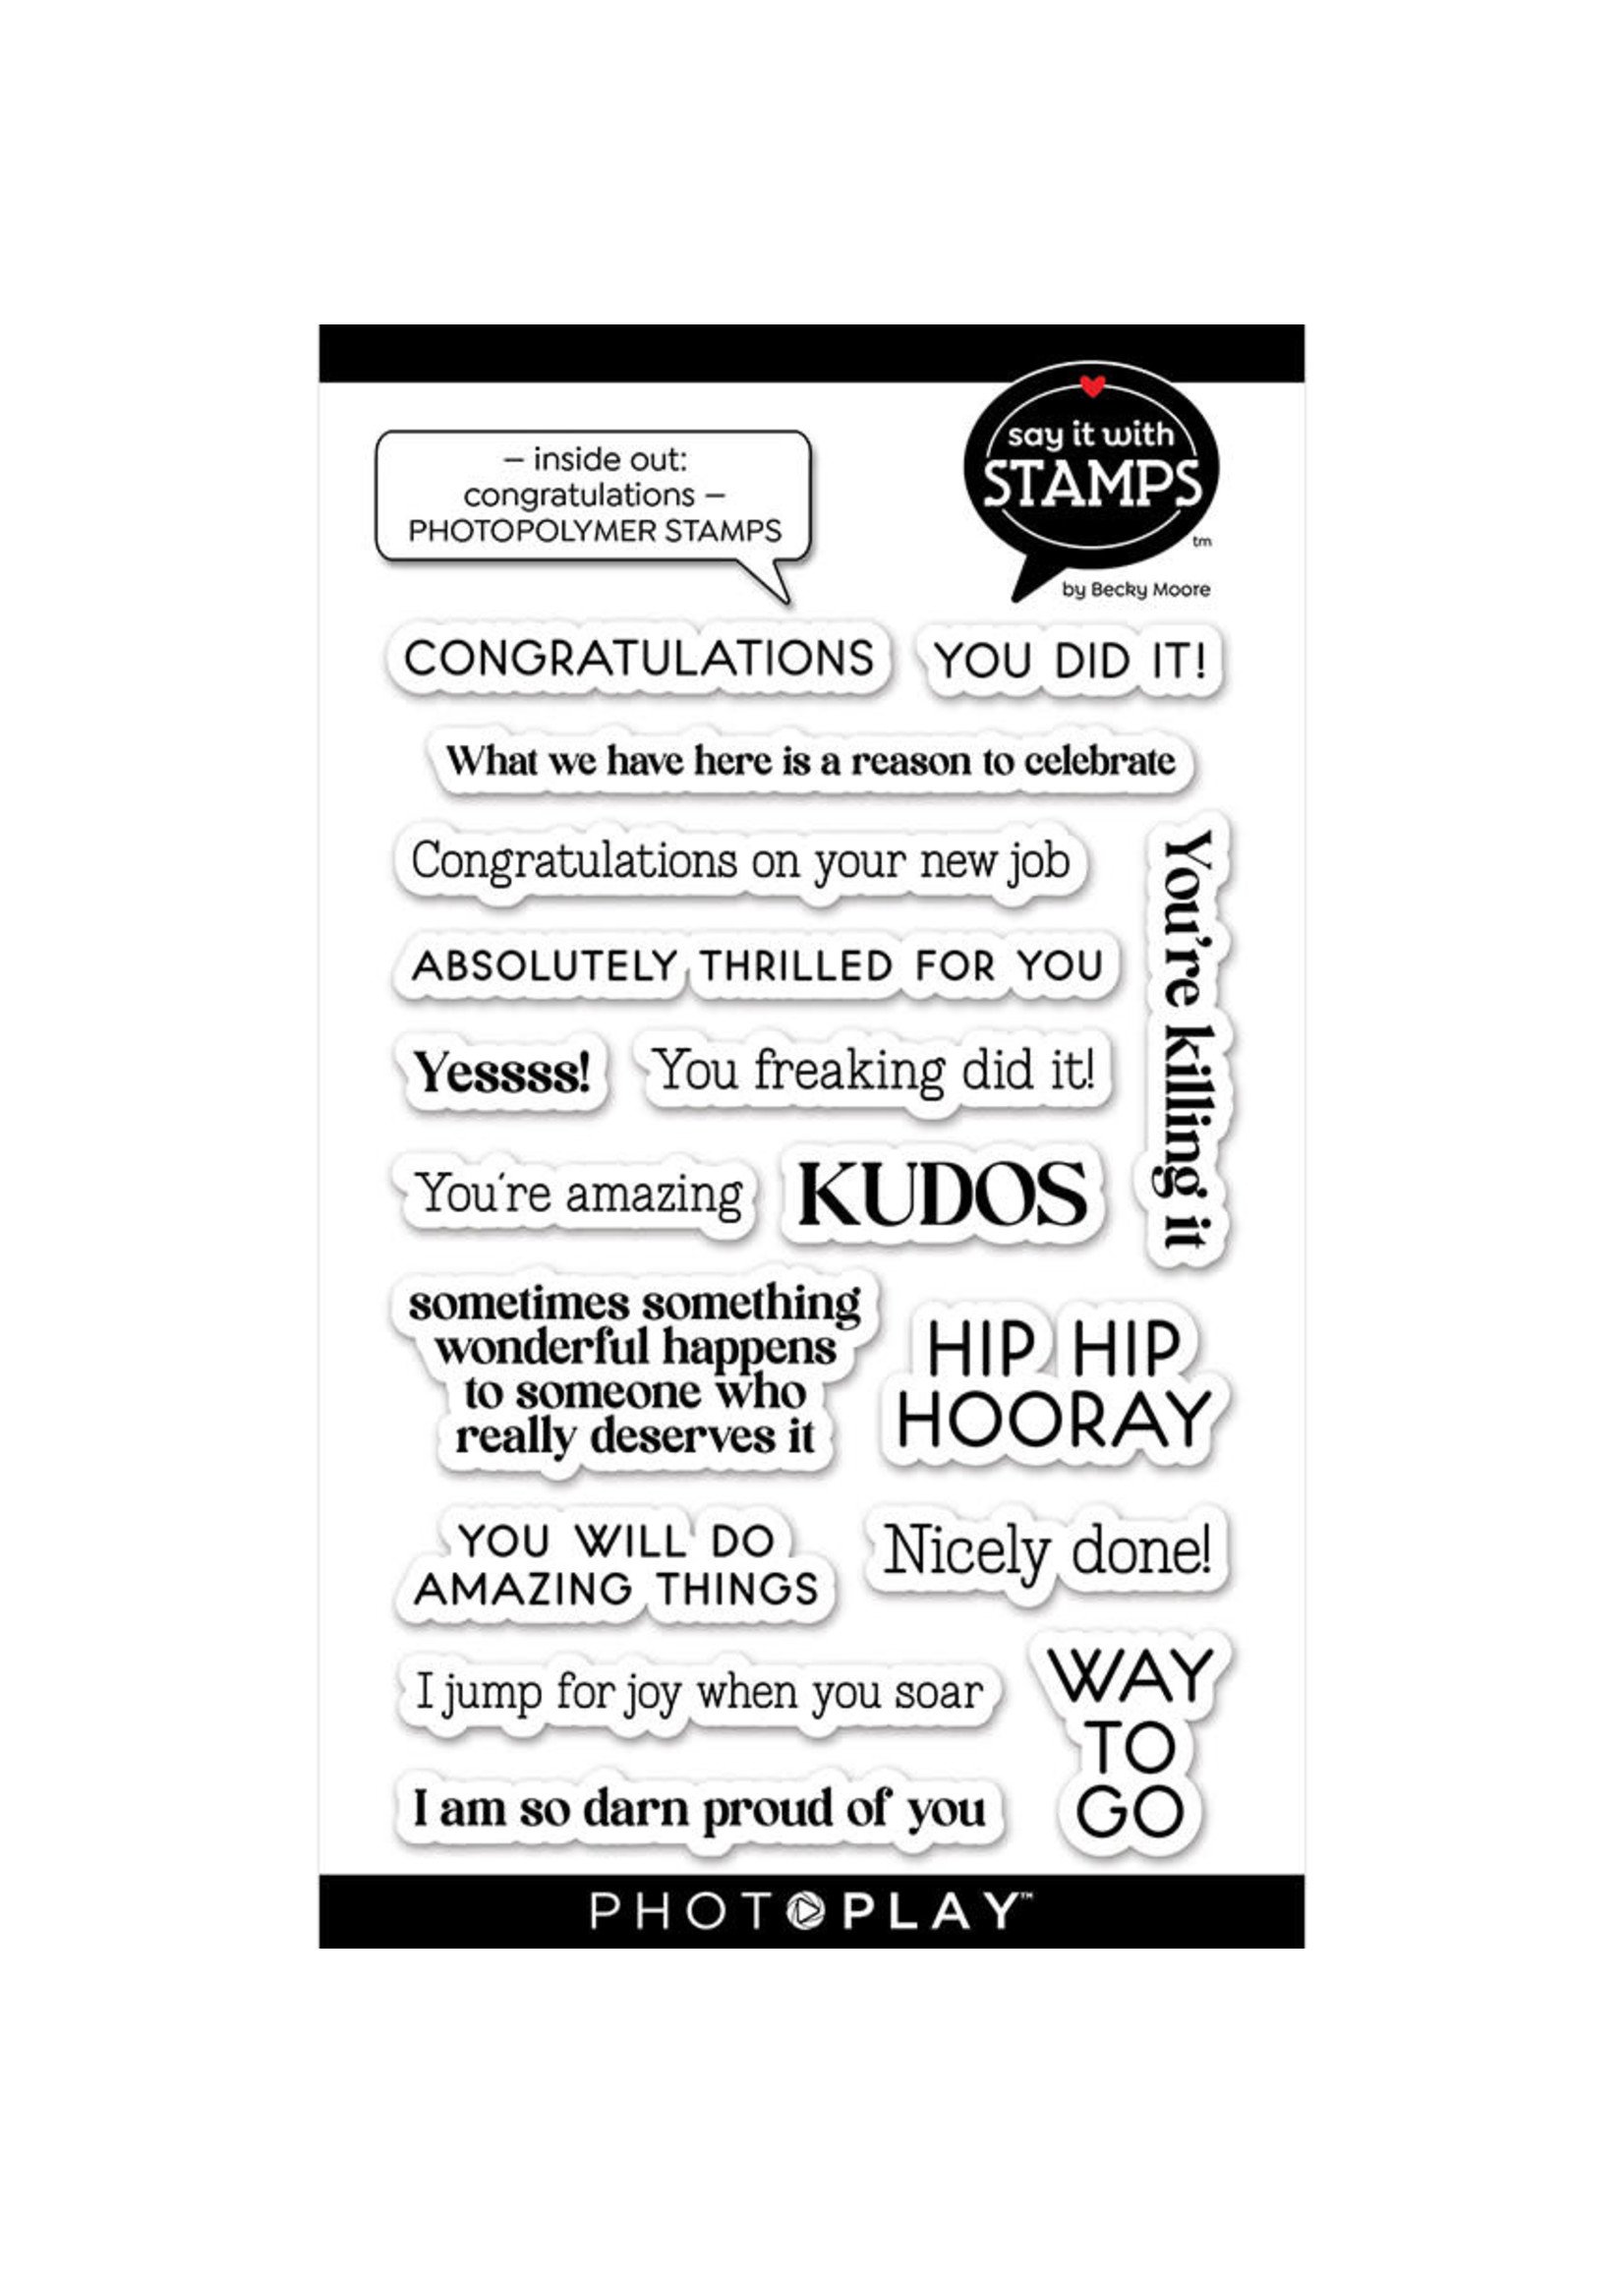 Photoplay Inside Out: Congratulations 4x6 Stamp